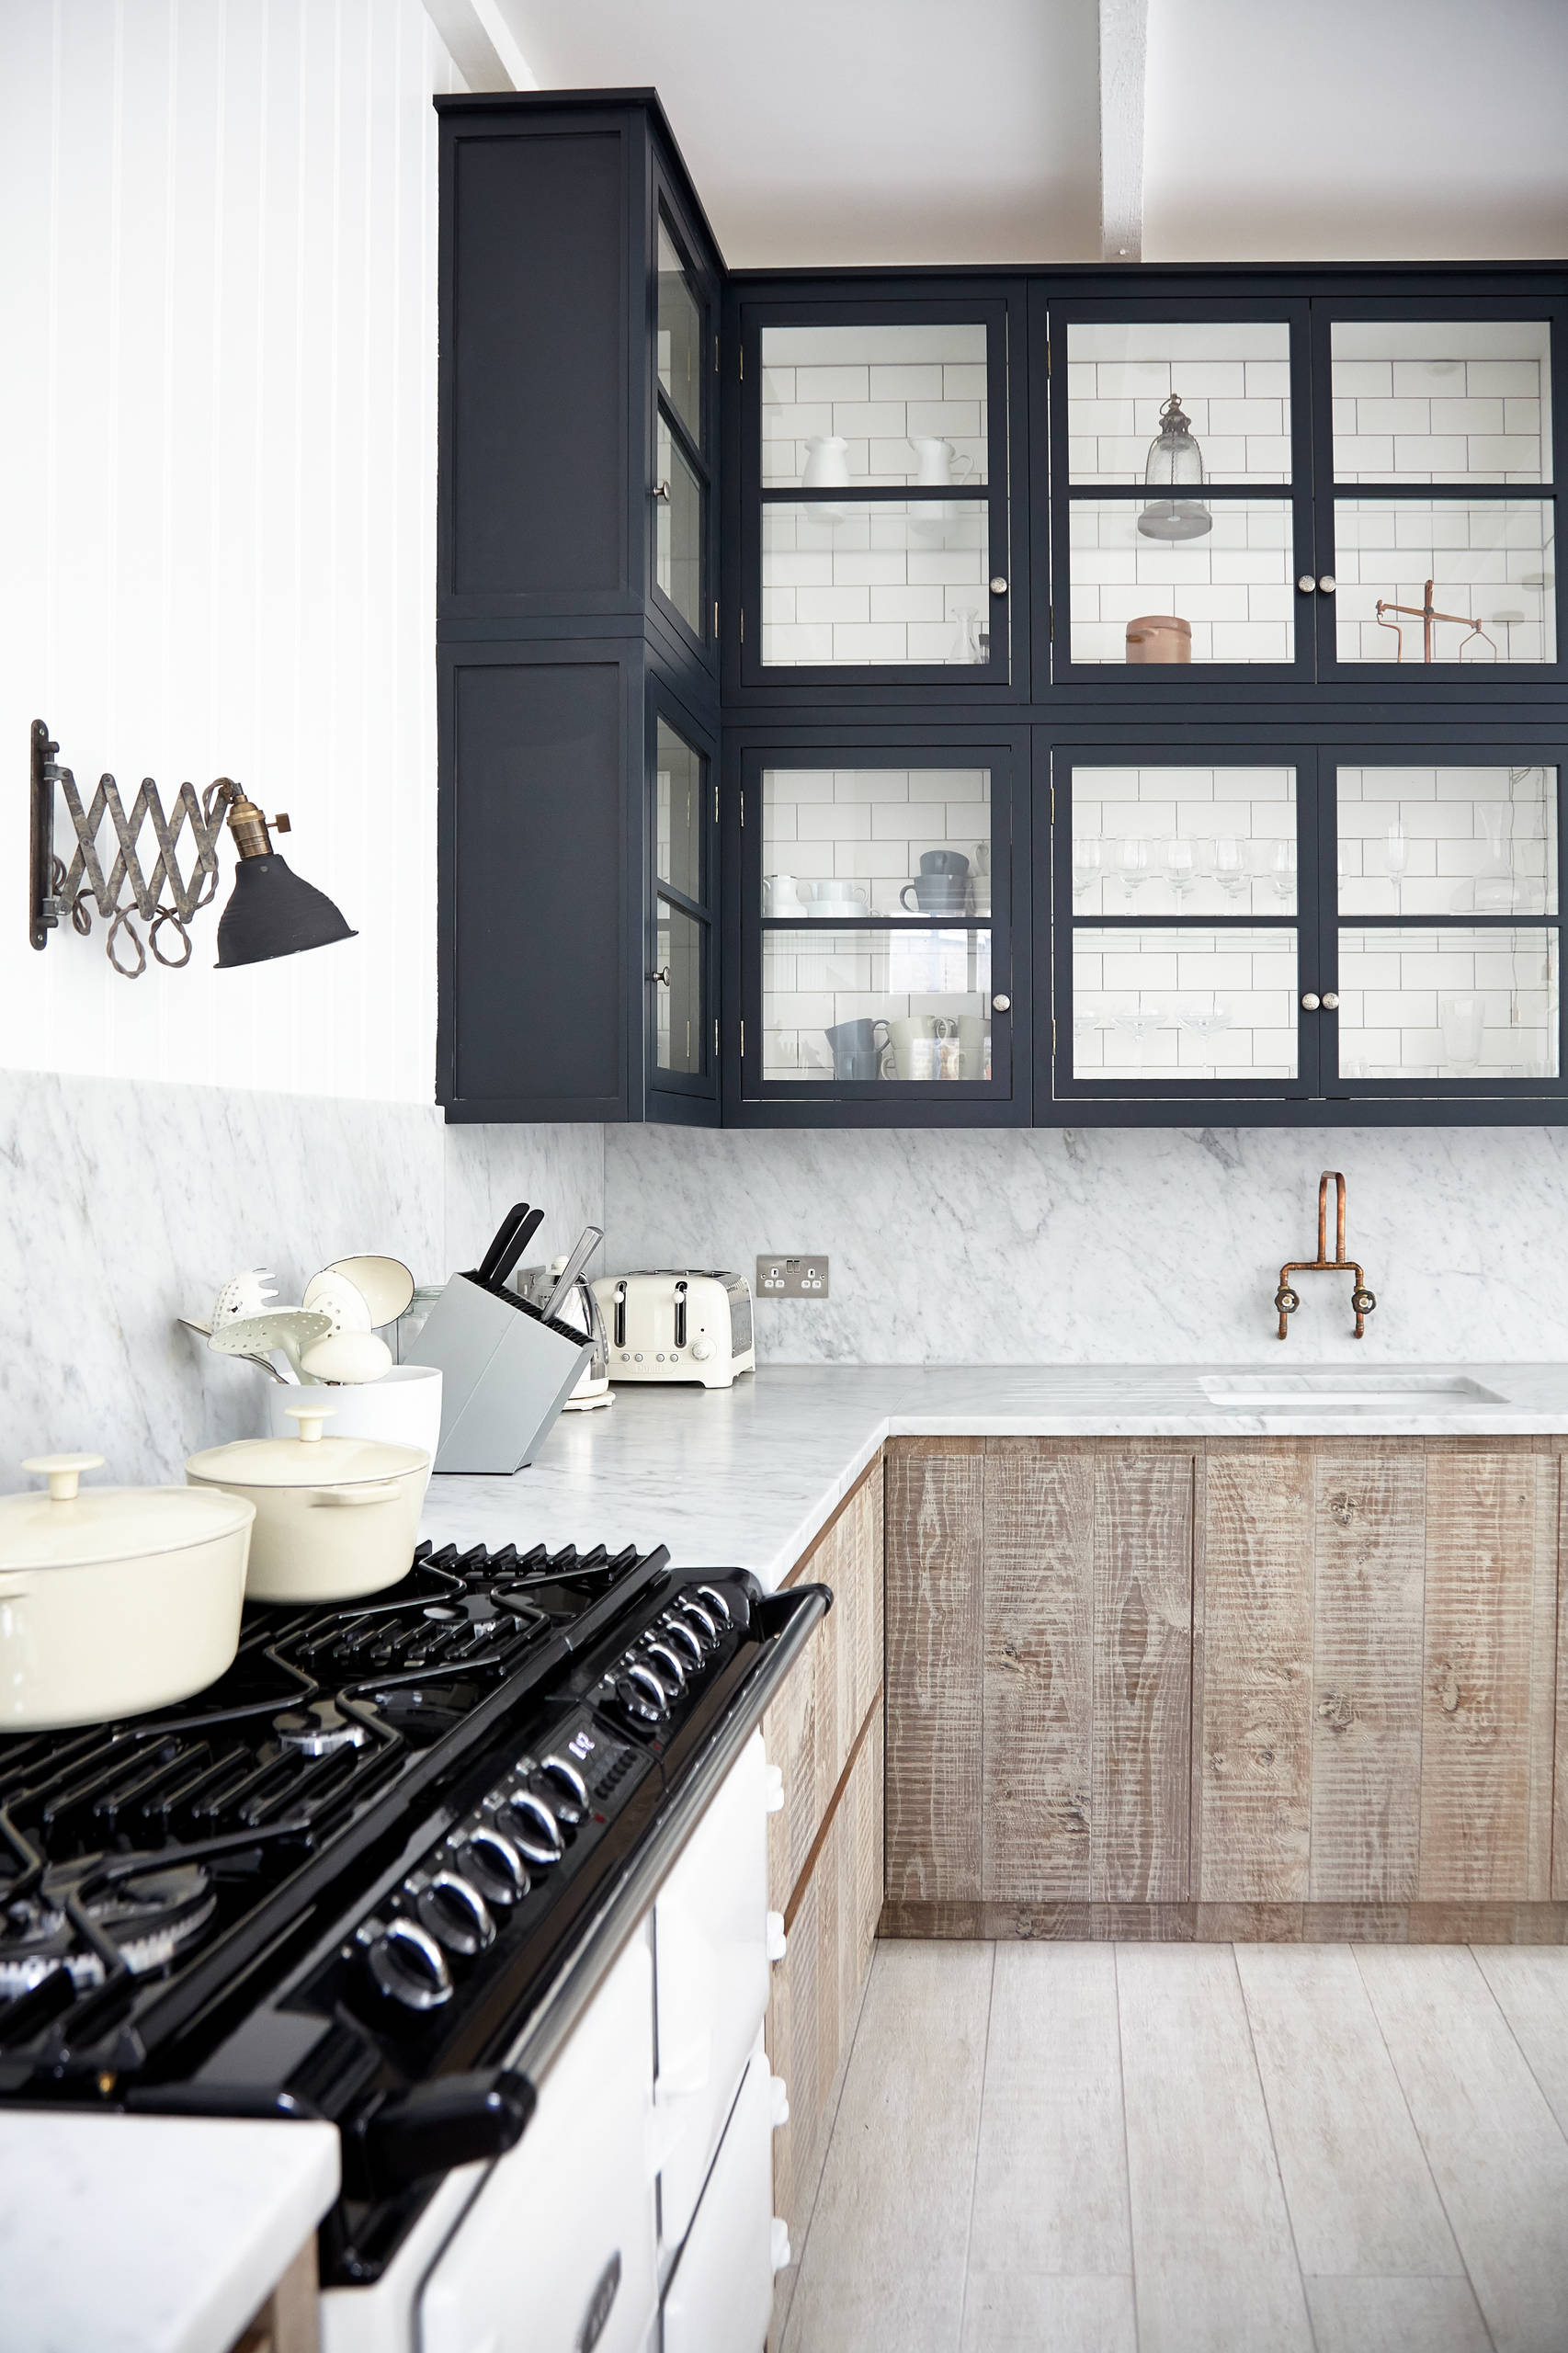 https://st.hzcdn.com/simgs/pictures/kitchens/industrial-chic-blakes-london-img~0e41aa700373a1d6_14-6841-1-953f25b.jpg